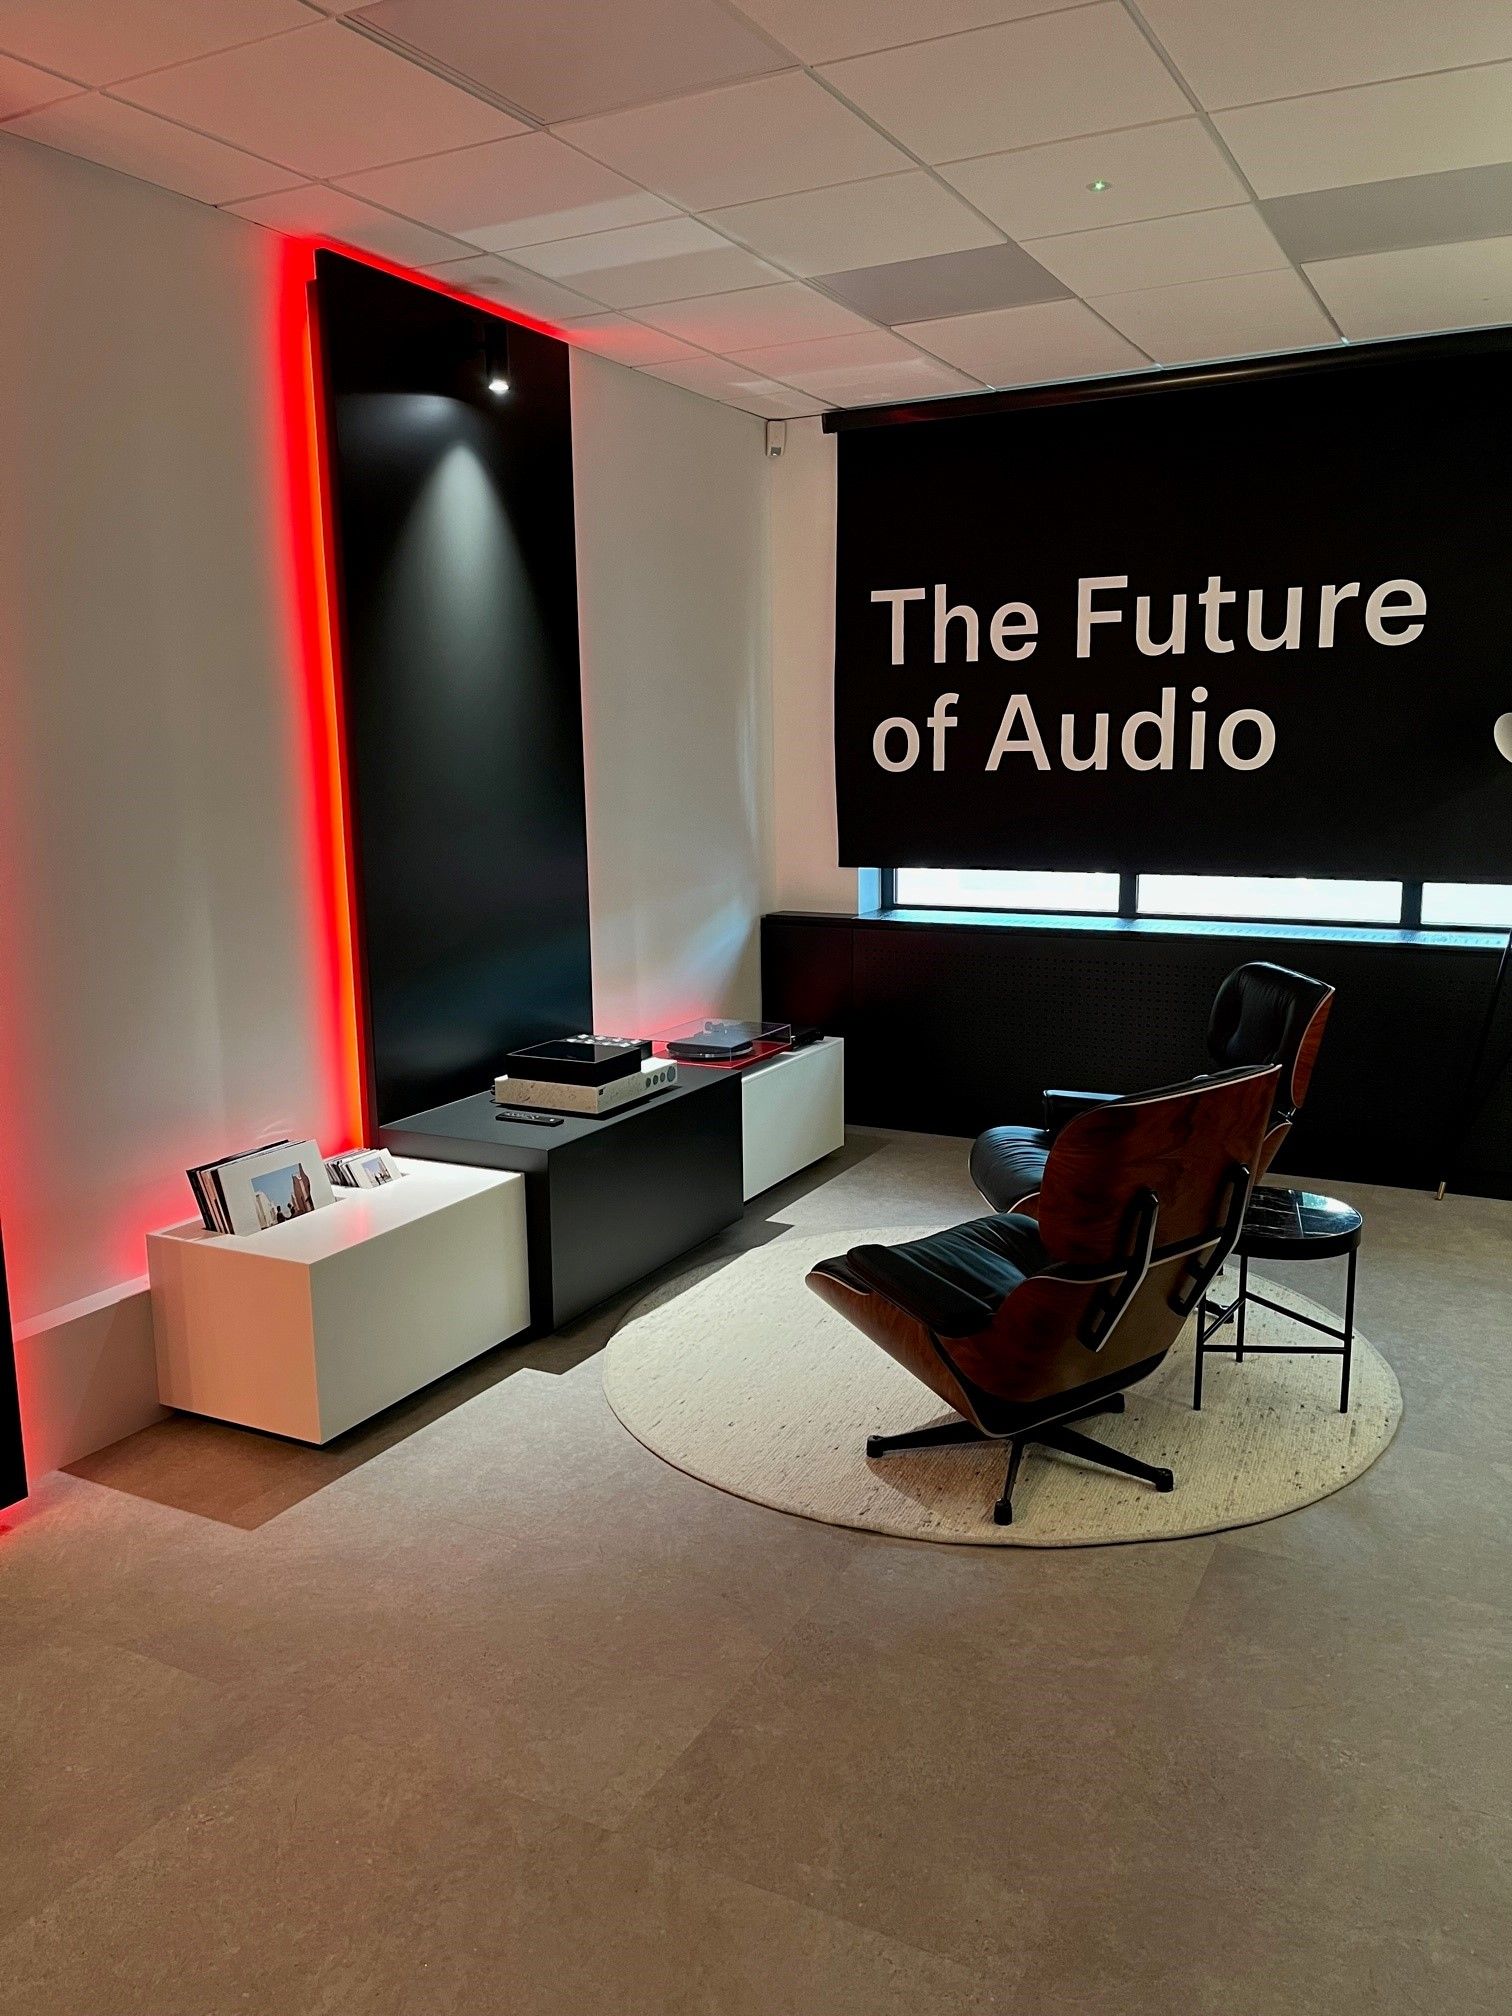 The Listening Room in the Audiophile Experience Center